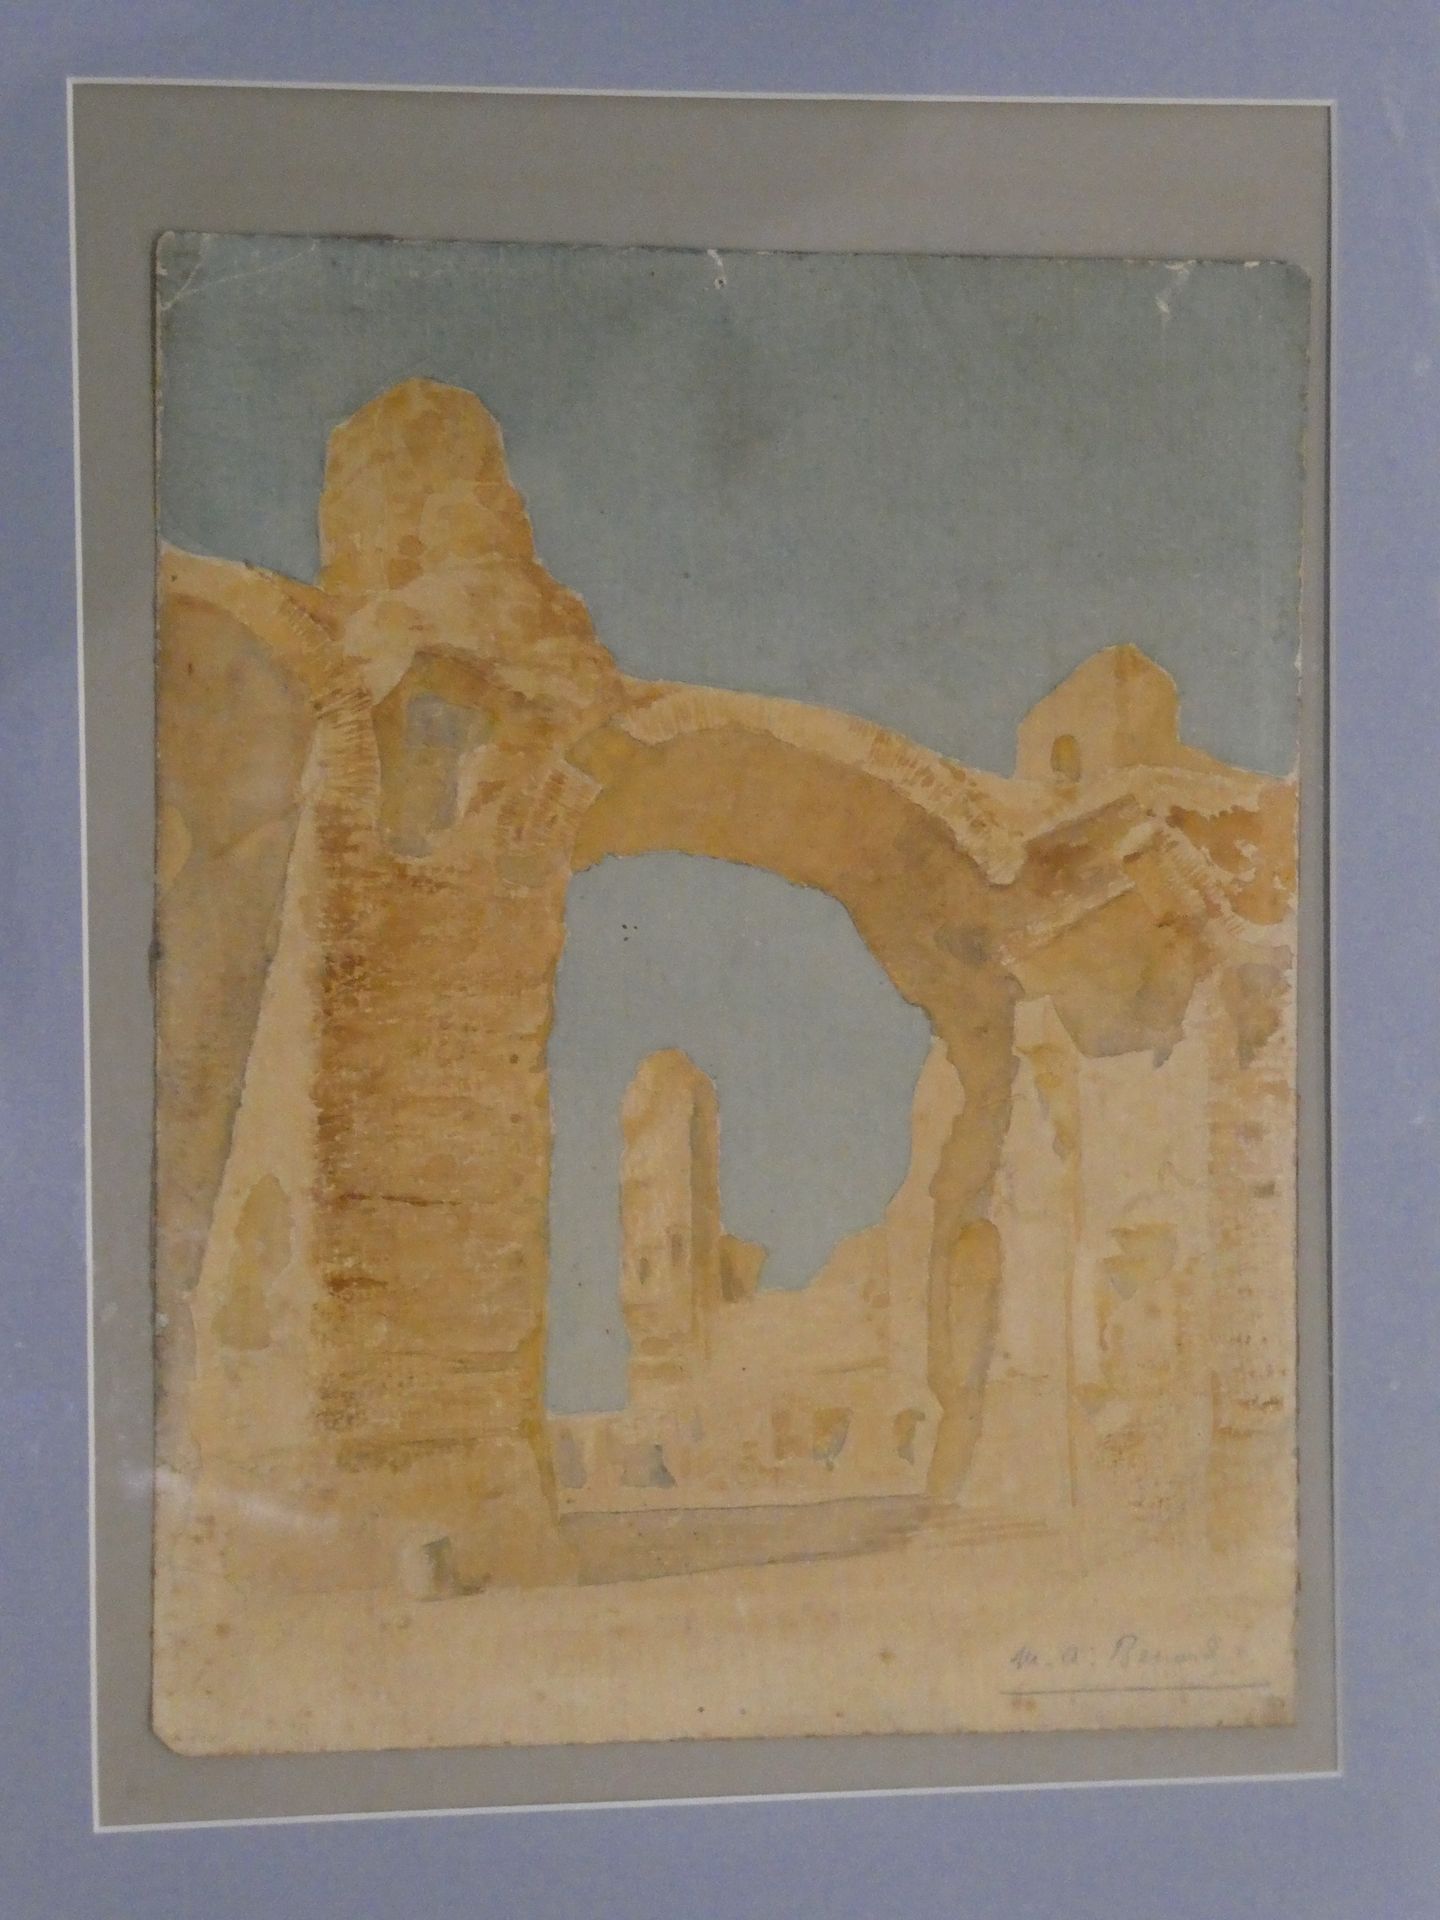 Null M A BERNARD

"Ancient Ruins"

Watercolor signed lower right

30.5 x 23.5 cm&hellip;